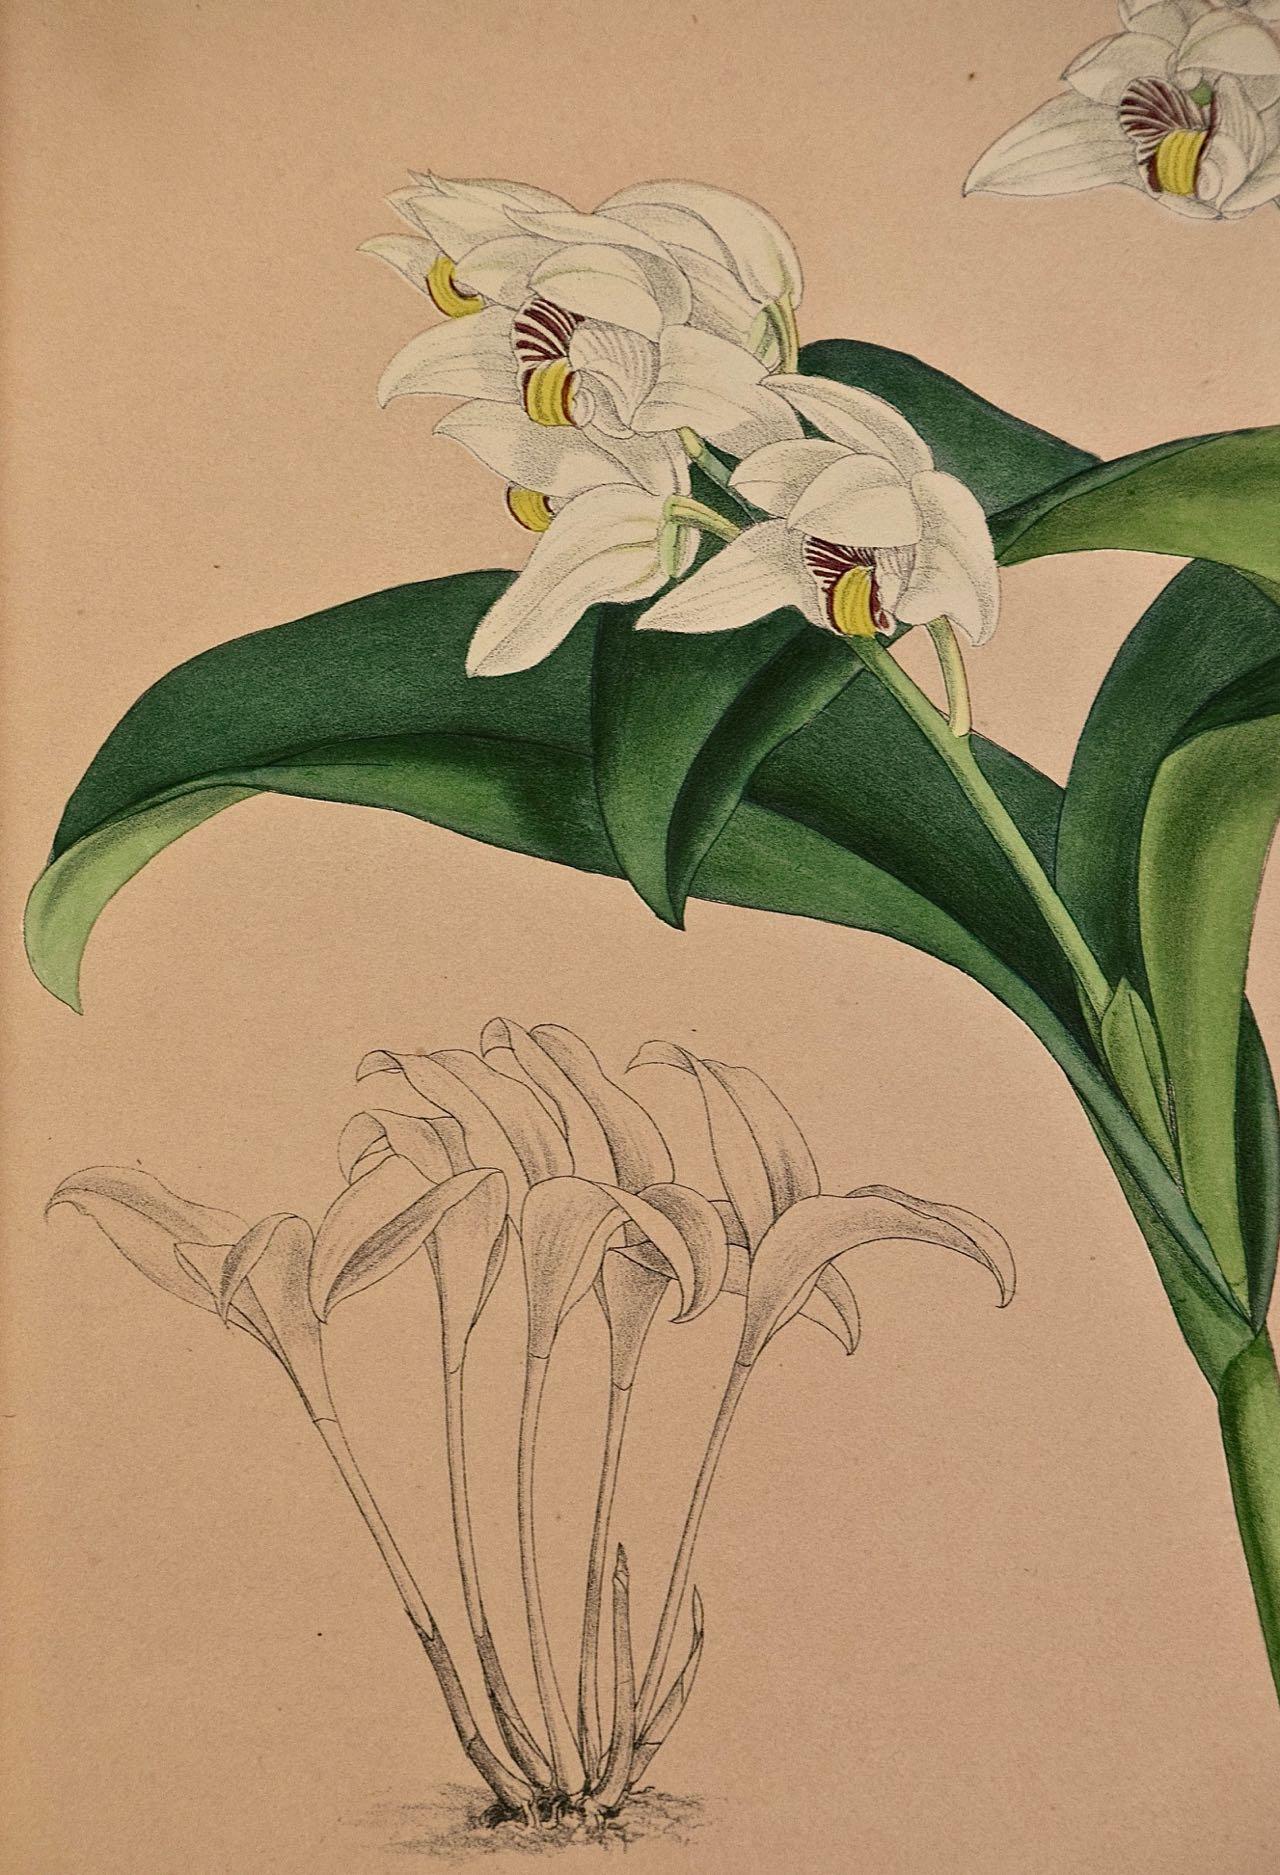 Orchids: Framed 19th C. Hand-Colored Engraving of 